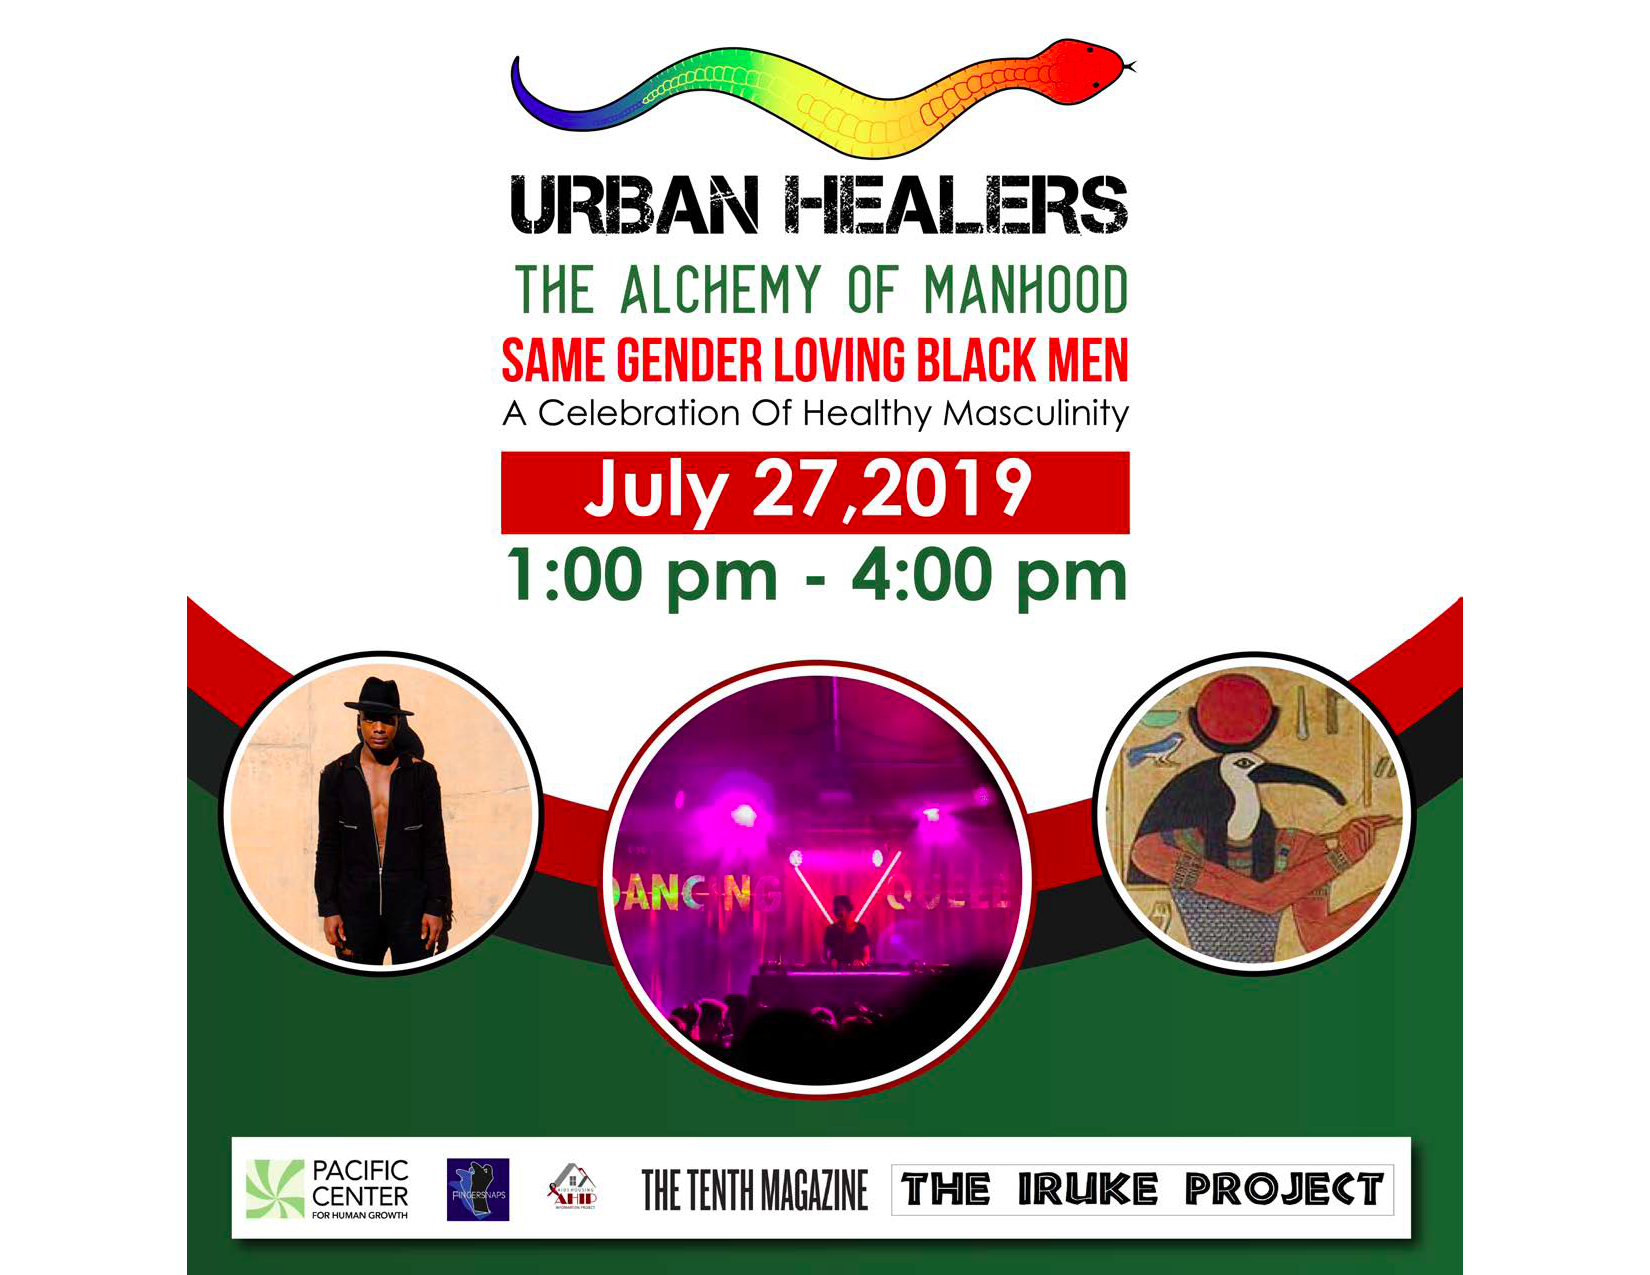 Urban Healers The Alchemy of Manhood, co-hosted by The Iruke Project, July 2019